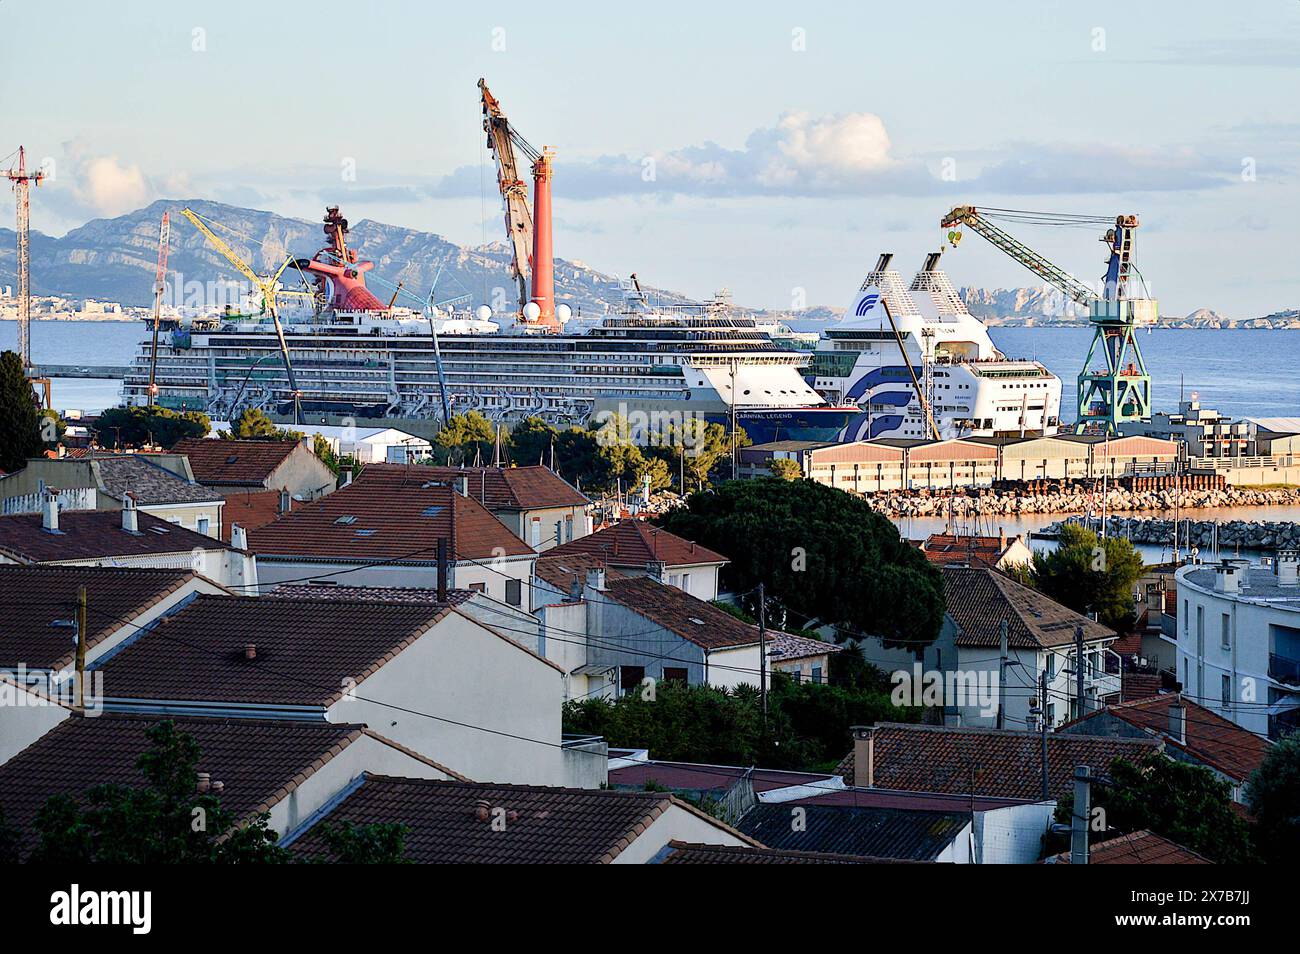 The cruise ship Carnival Legend, the Pipelay Crane Vessel (PCV) Saipem Constellation and the ocean liner Rhapsody are seen docked in 'Form 10' for maintenance and repairs. “Form 10” is the largest basin on the naval site of the Grand Port Maritime de Marseille (GPMM). It is the largest form of refit in the Mediterranean. (Photo by Gerard Bottino / SOPA Images/Sipa USA) Stock Photo